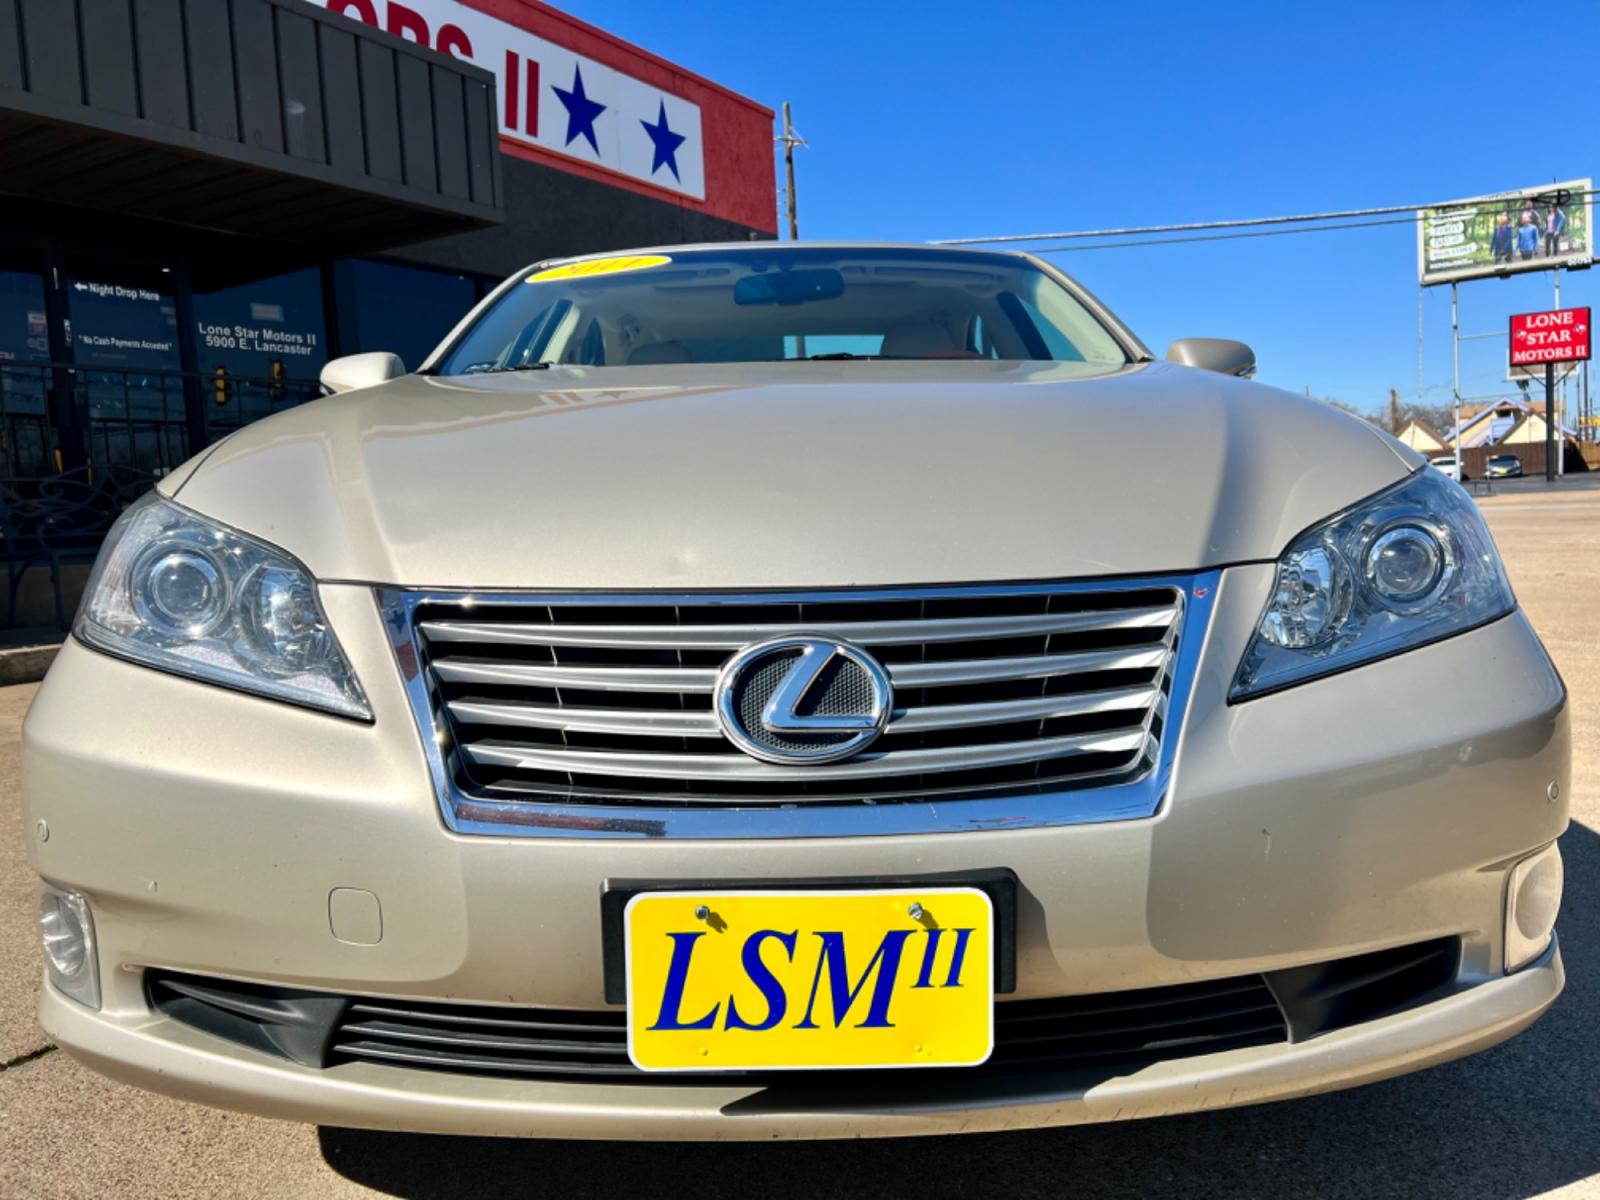 2011 GOLD LEXUS ES 350 (JTHBK1EG9B2) , located at 5900 E. Lancaster Ave., Fort Worth, TX, 76112, (817) 457-5456, 0.000000, 0.000000 - This is a 2011 LEXUS ES 350 4 DOOR SEDAN that is in excellent condition. There are no dents or scratches. The interior is clean with no rips or tears or stains. All power windows, door locks and seats. Ice cold AC for those hot Texas summer days. It is equipped with a CD player, AM/FM radio, AUX por - Photo #2